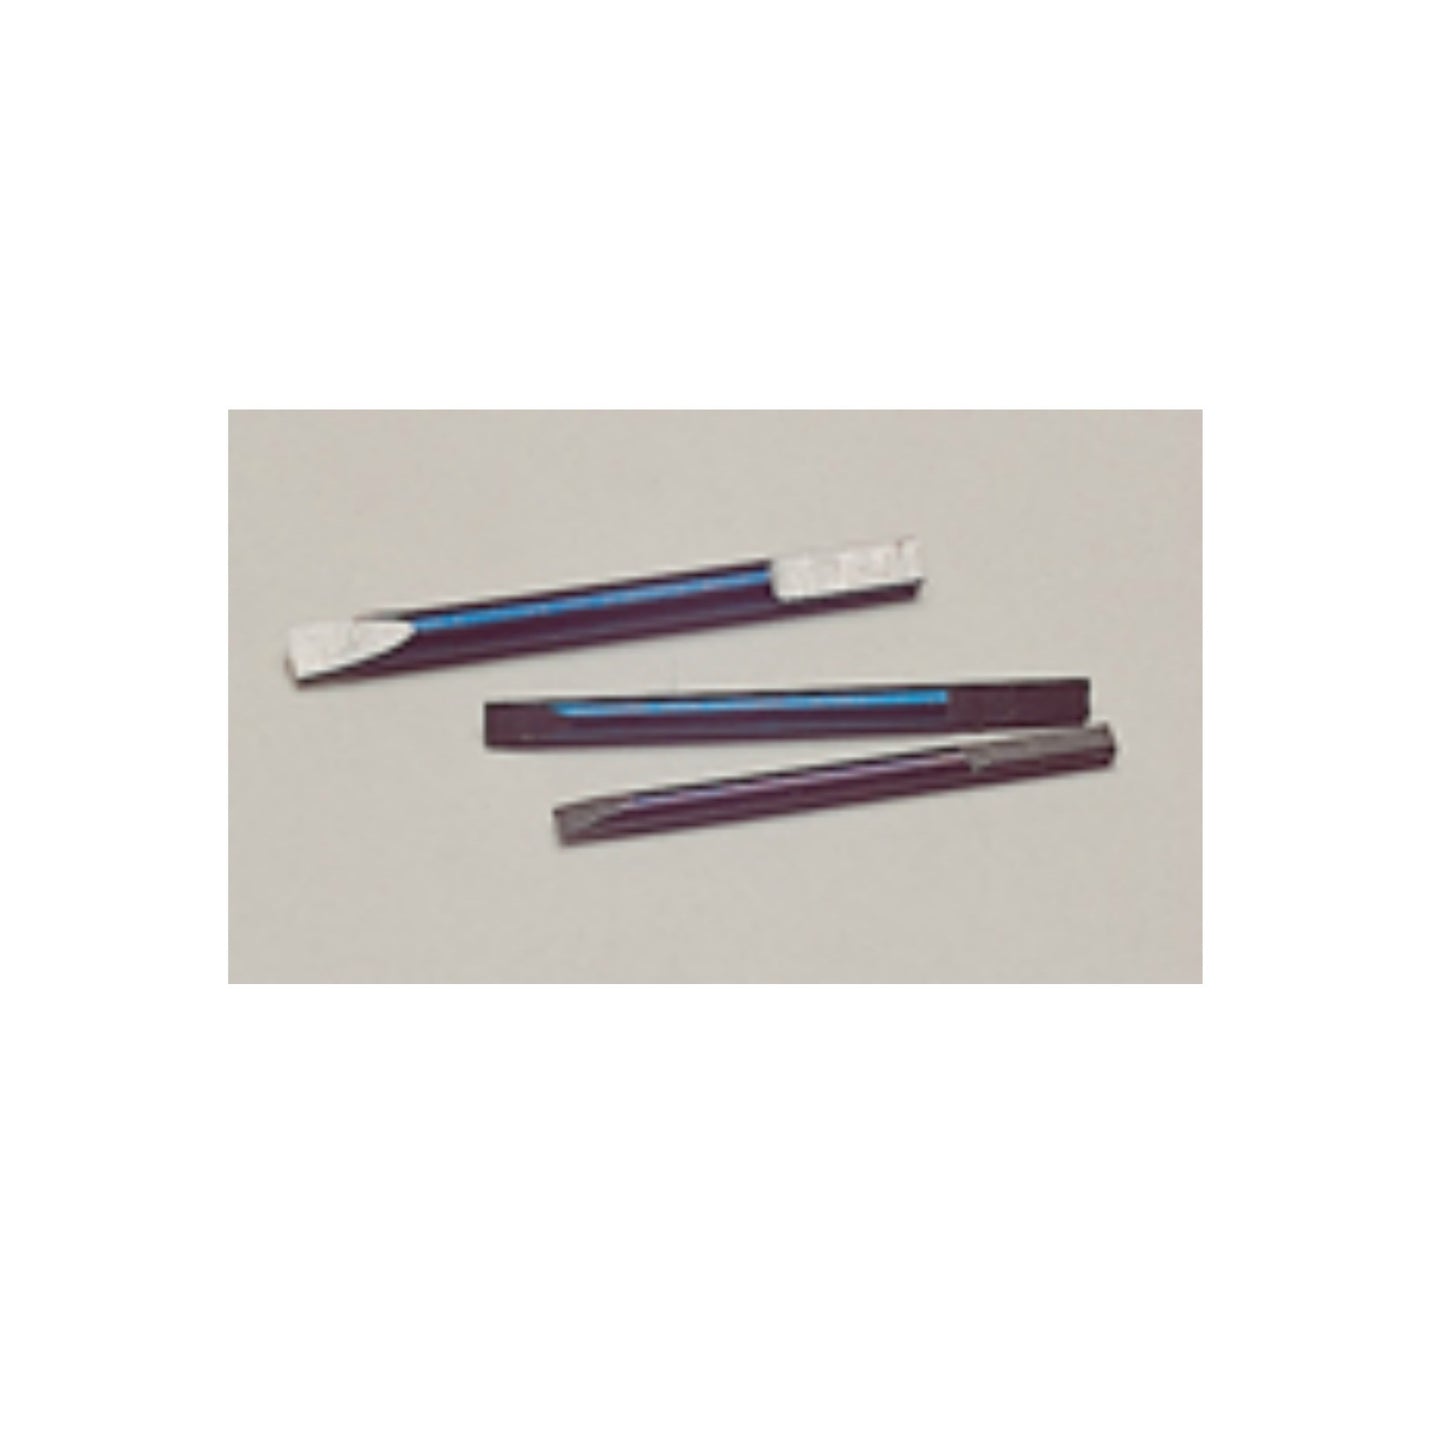 Replacement Blades for Set-Screw Screwdrivers